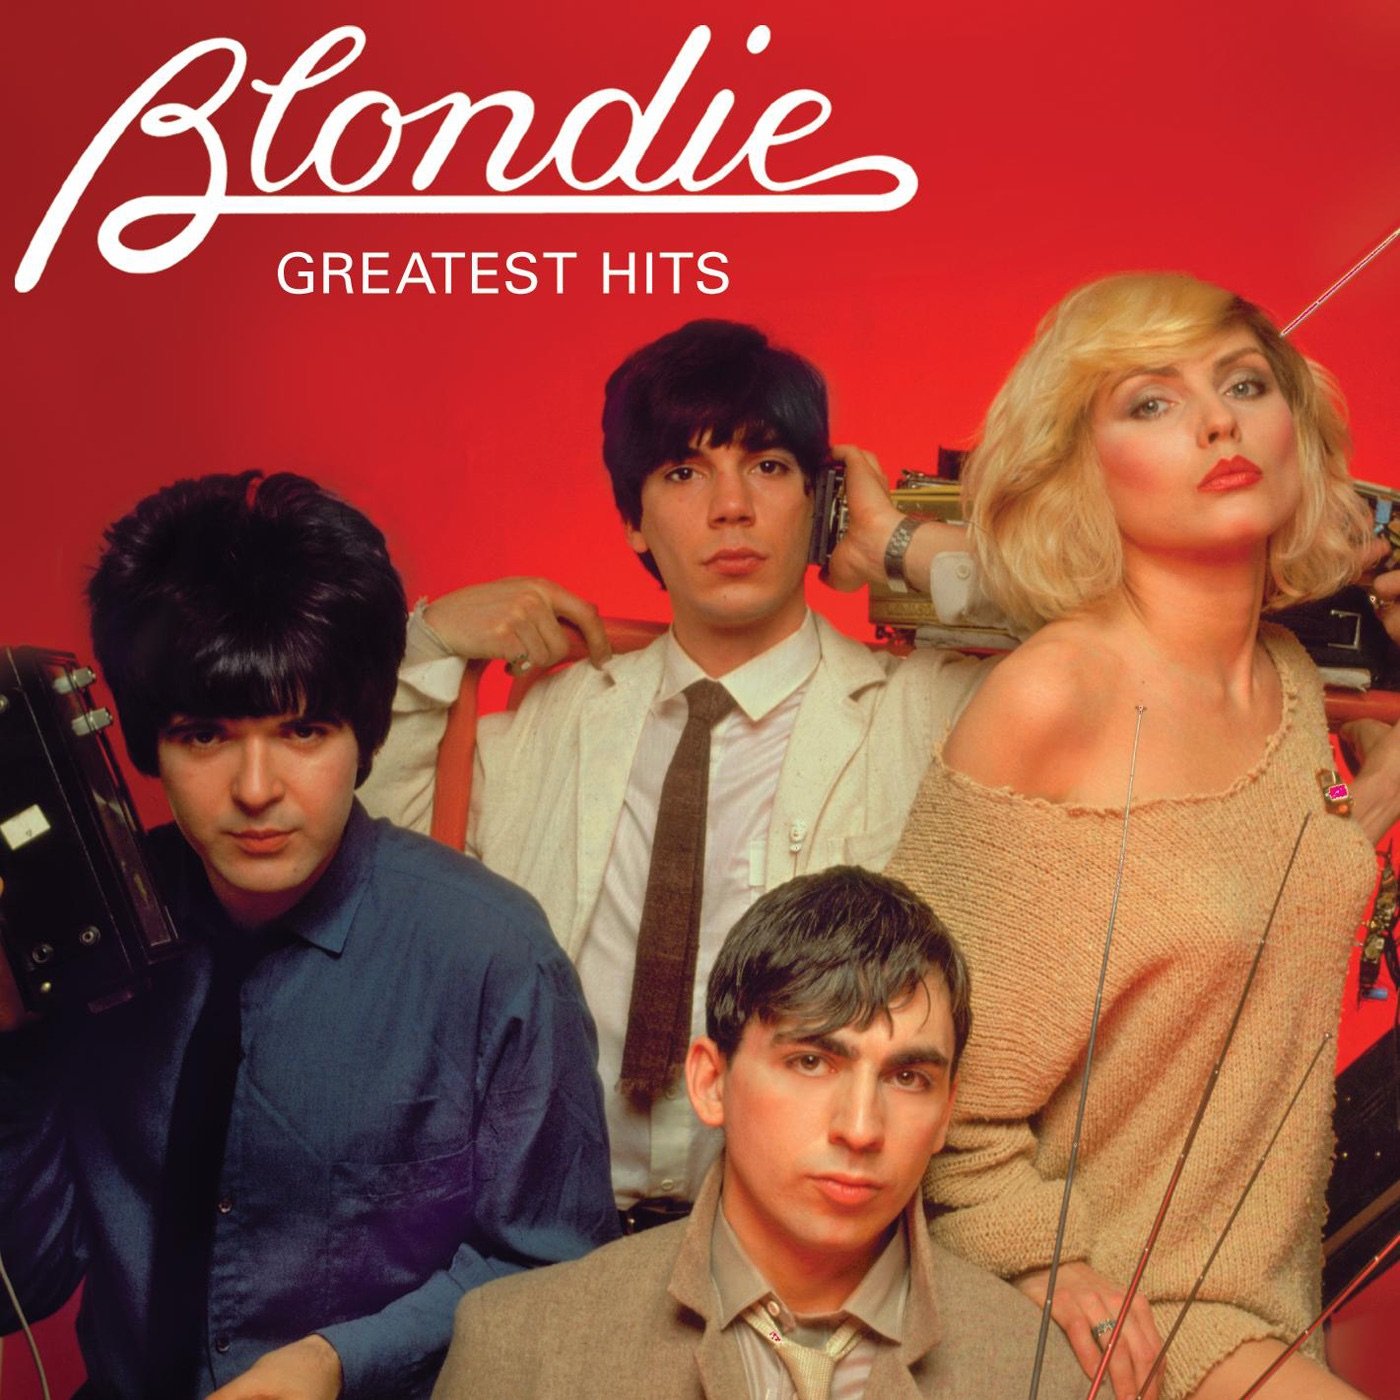 Blondie-Greatest Hits-(72435-42068-2-5)-REMASTERED-CD-FLAC-2002-OCCiPiTAL Download